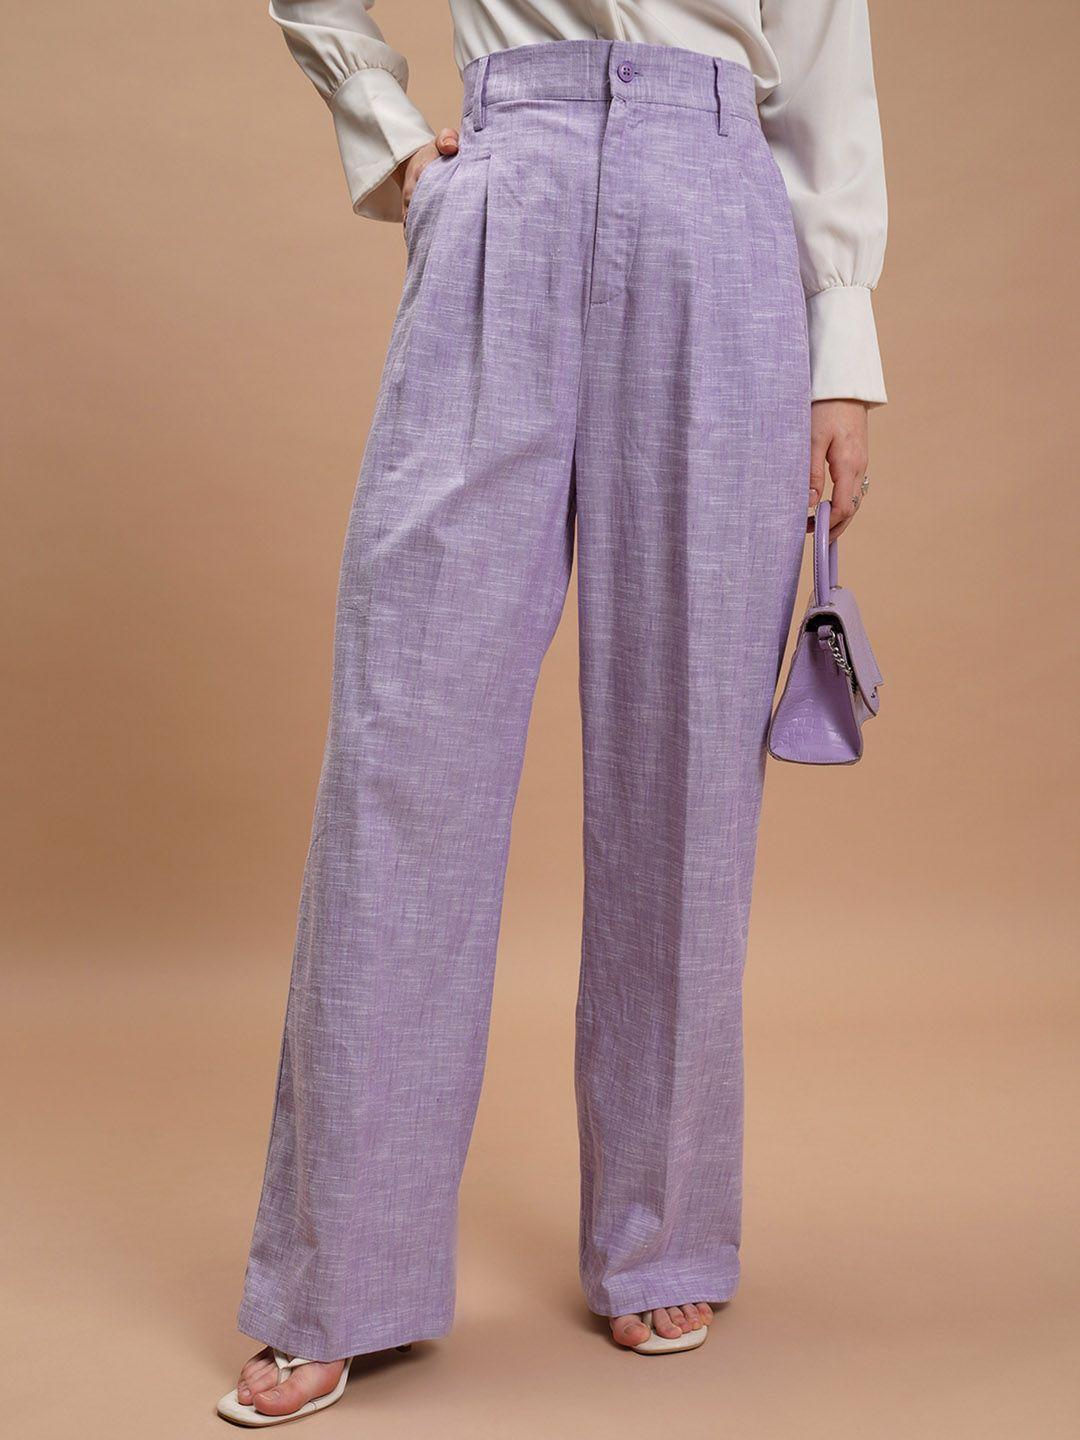 tokyo talkies women lavender checked flared trousers